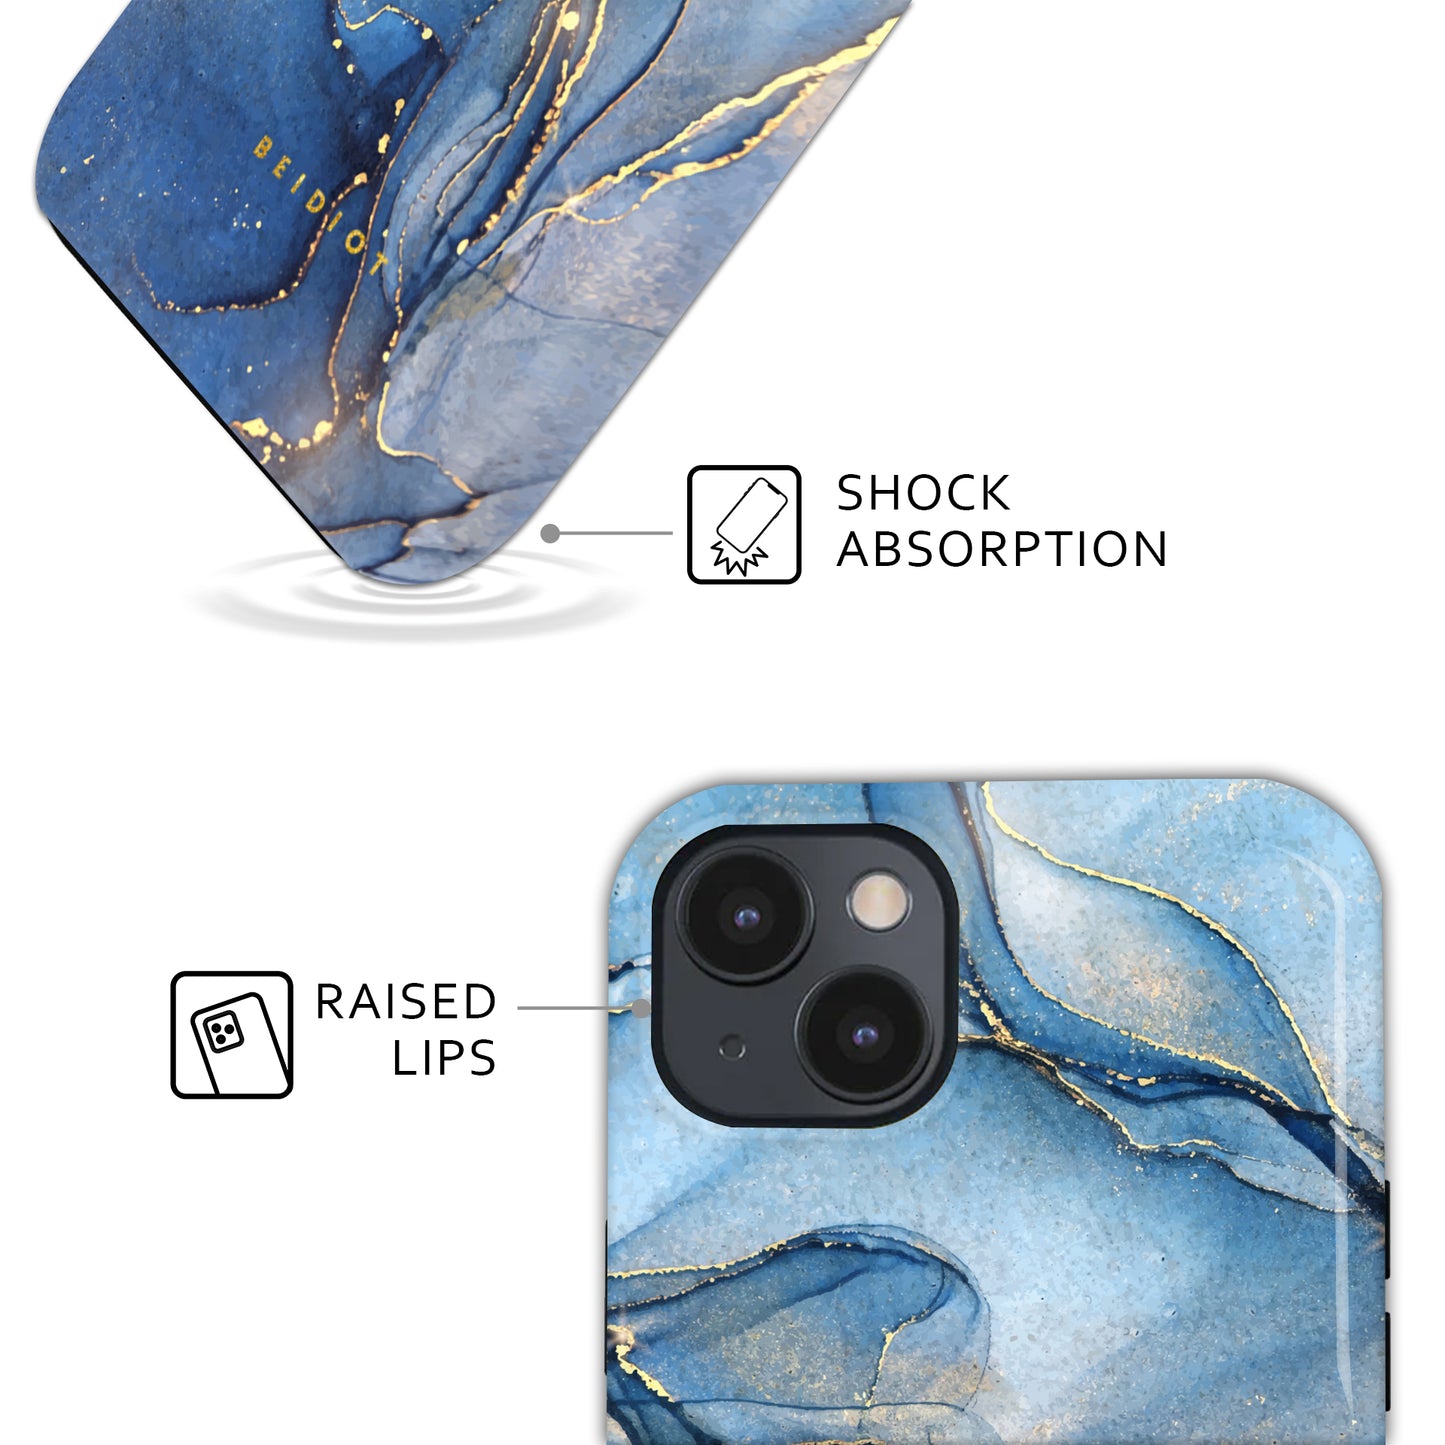 Shimmering Seas iPhone Case